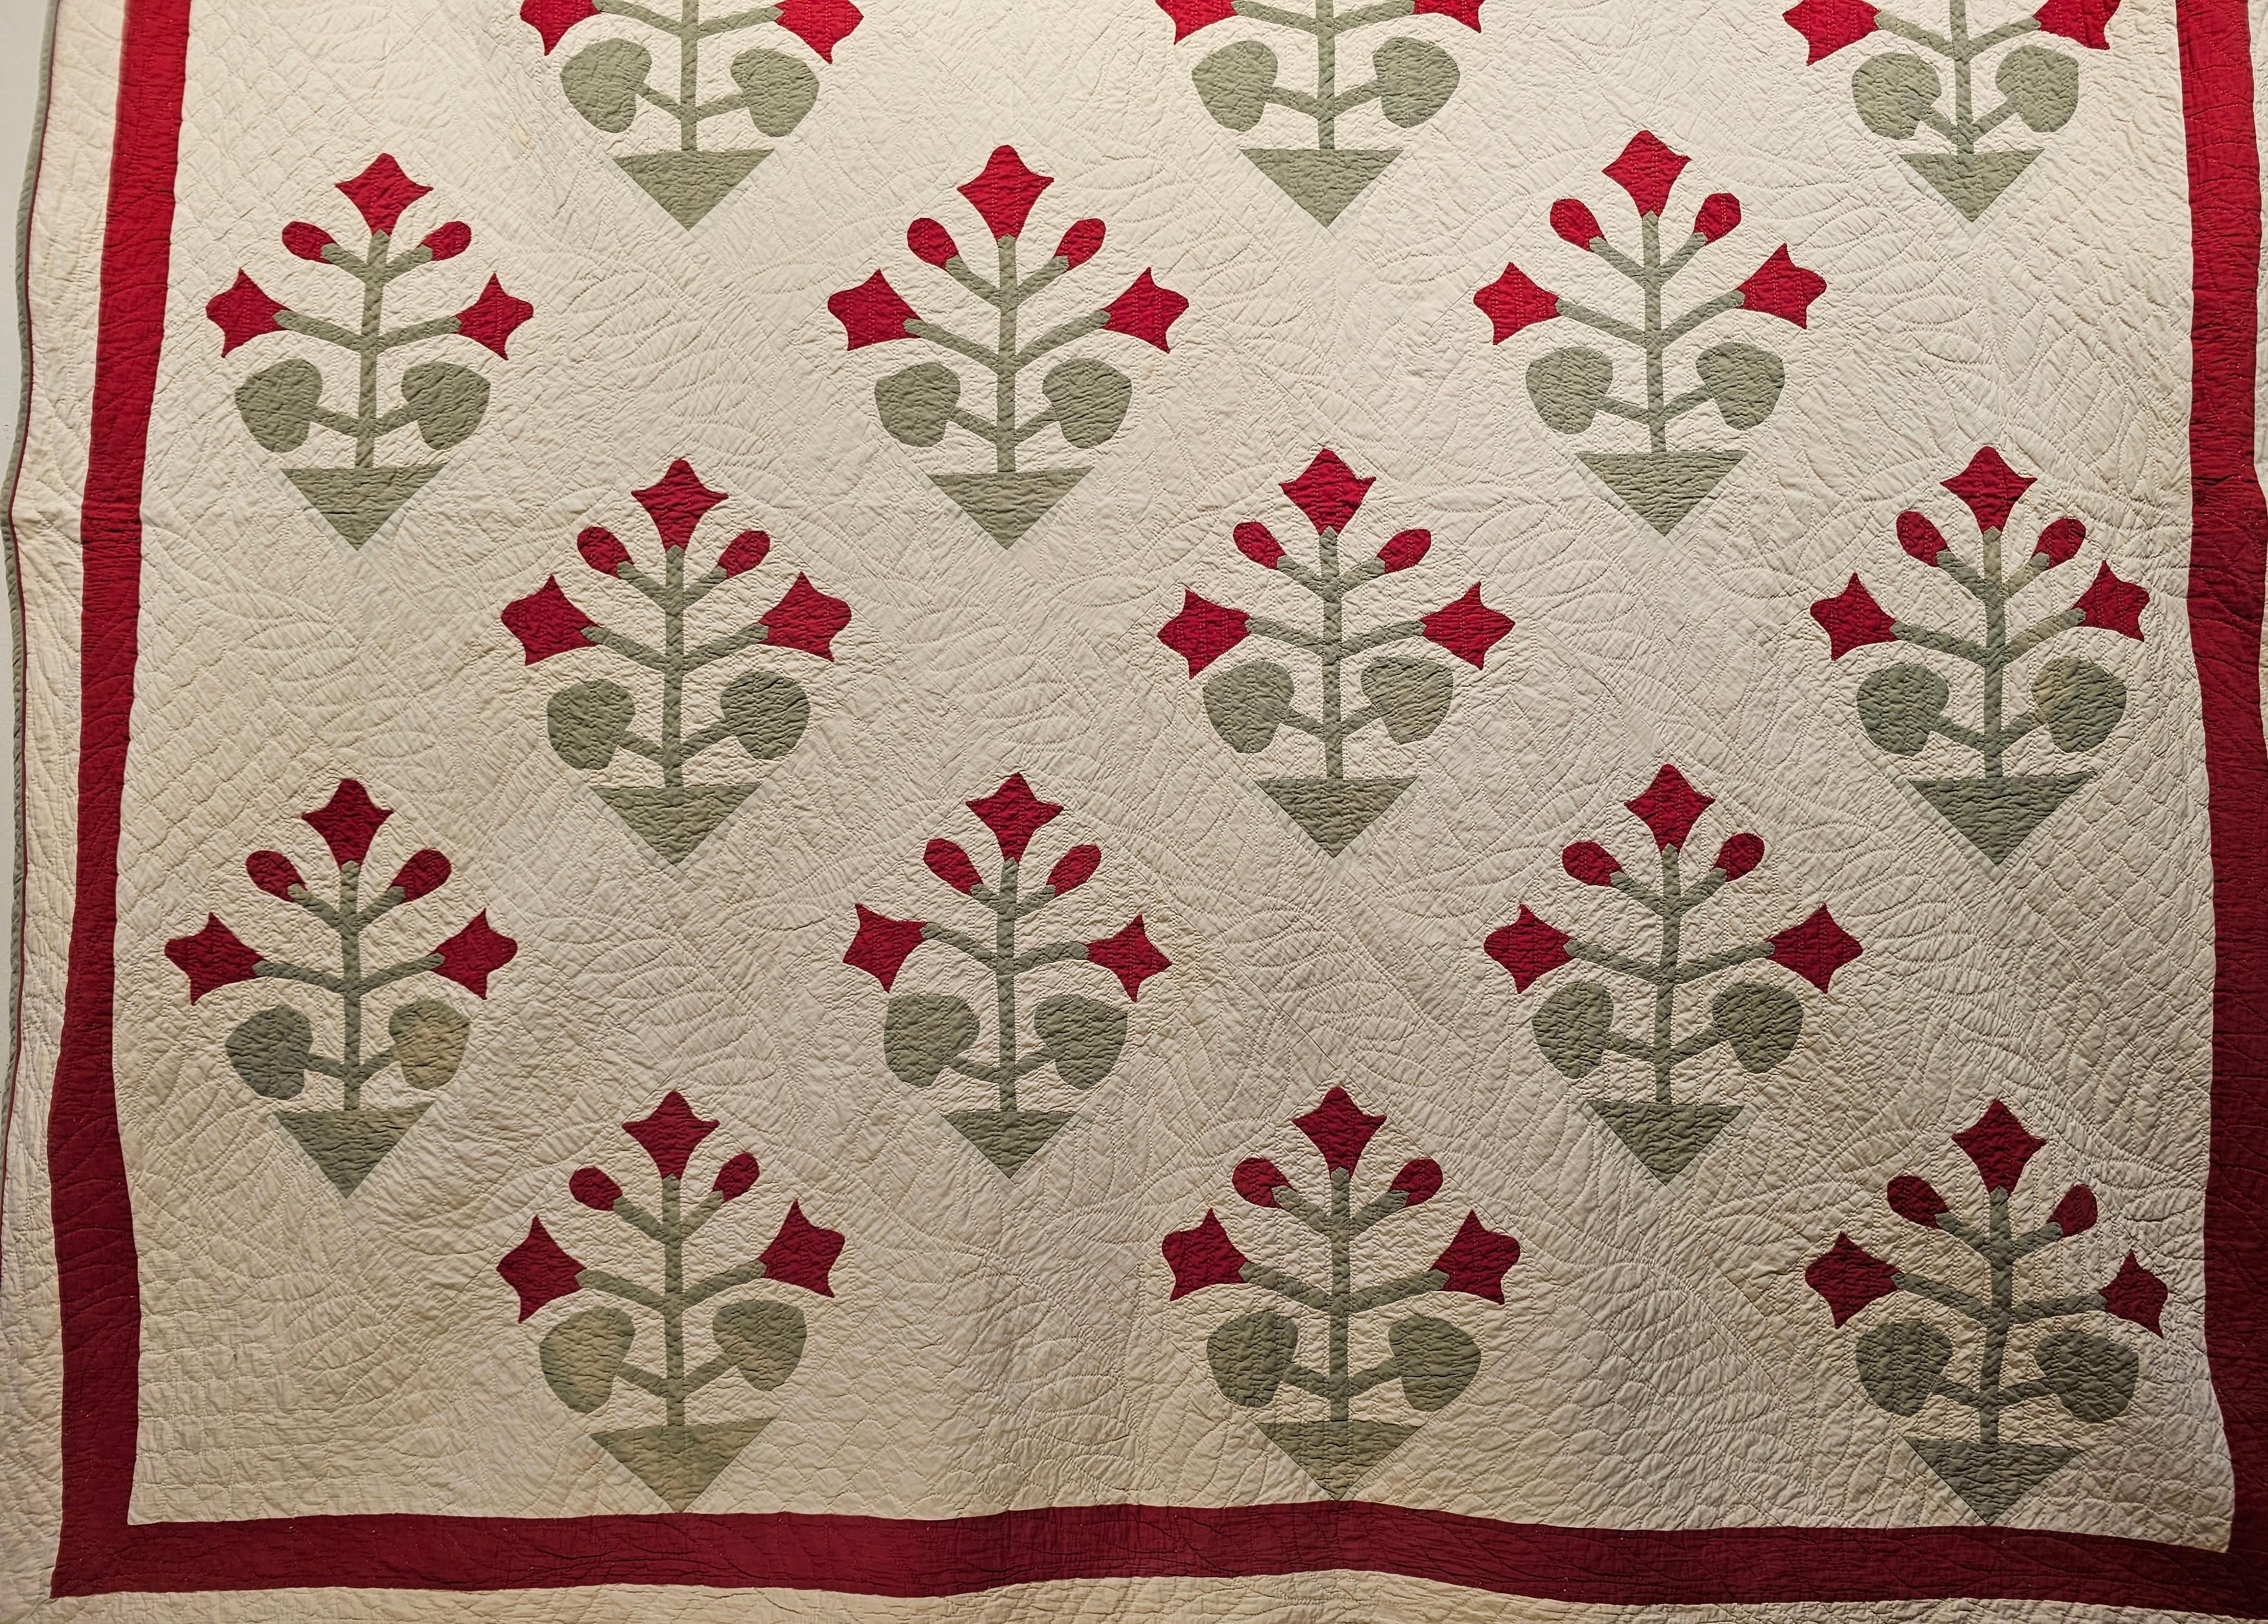 Cotton 19th Century American Applique Quilt in Floral Pattern in Ivory, Red, and Green